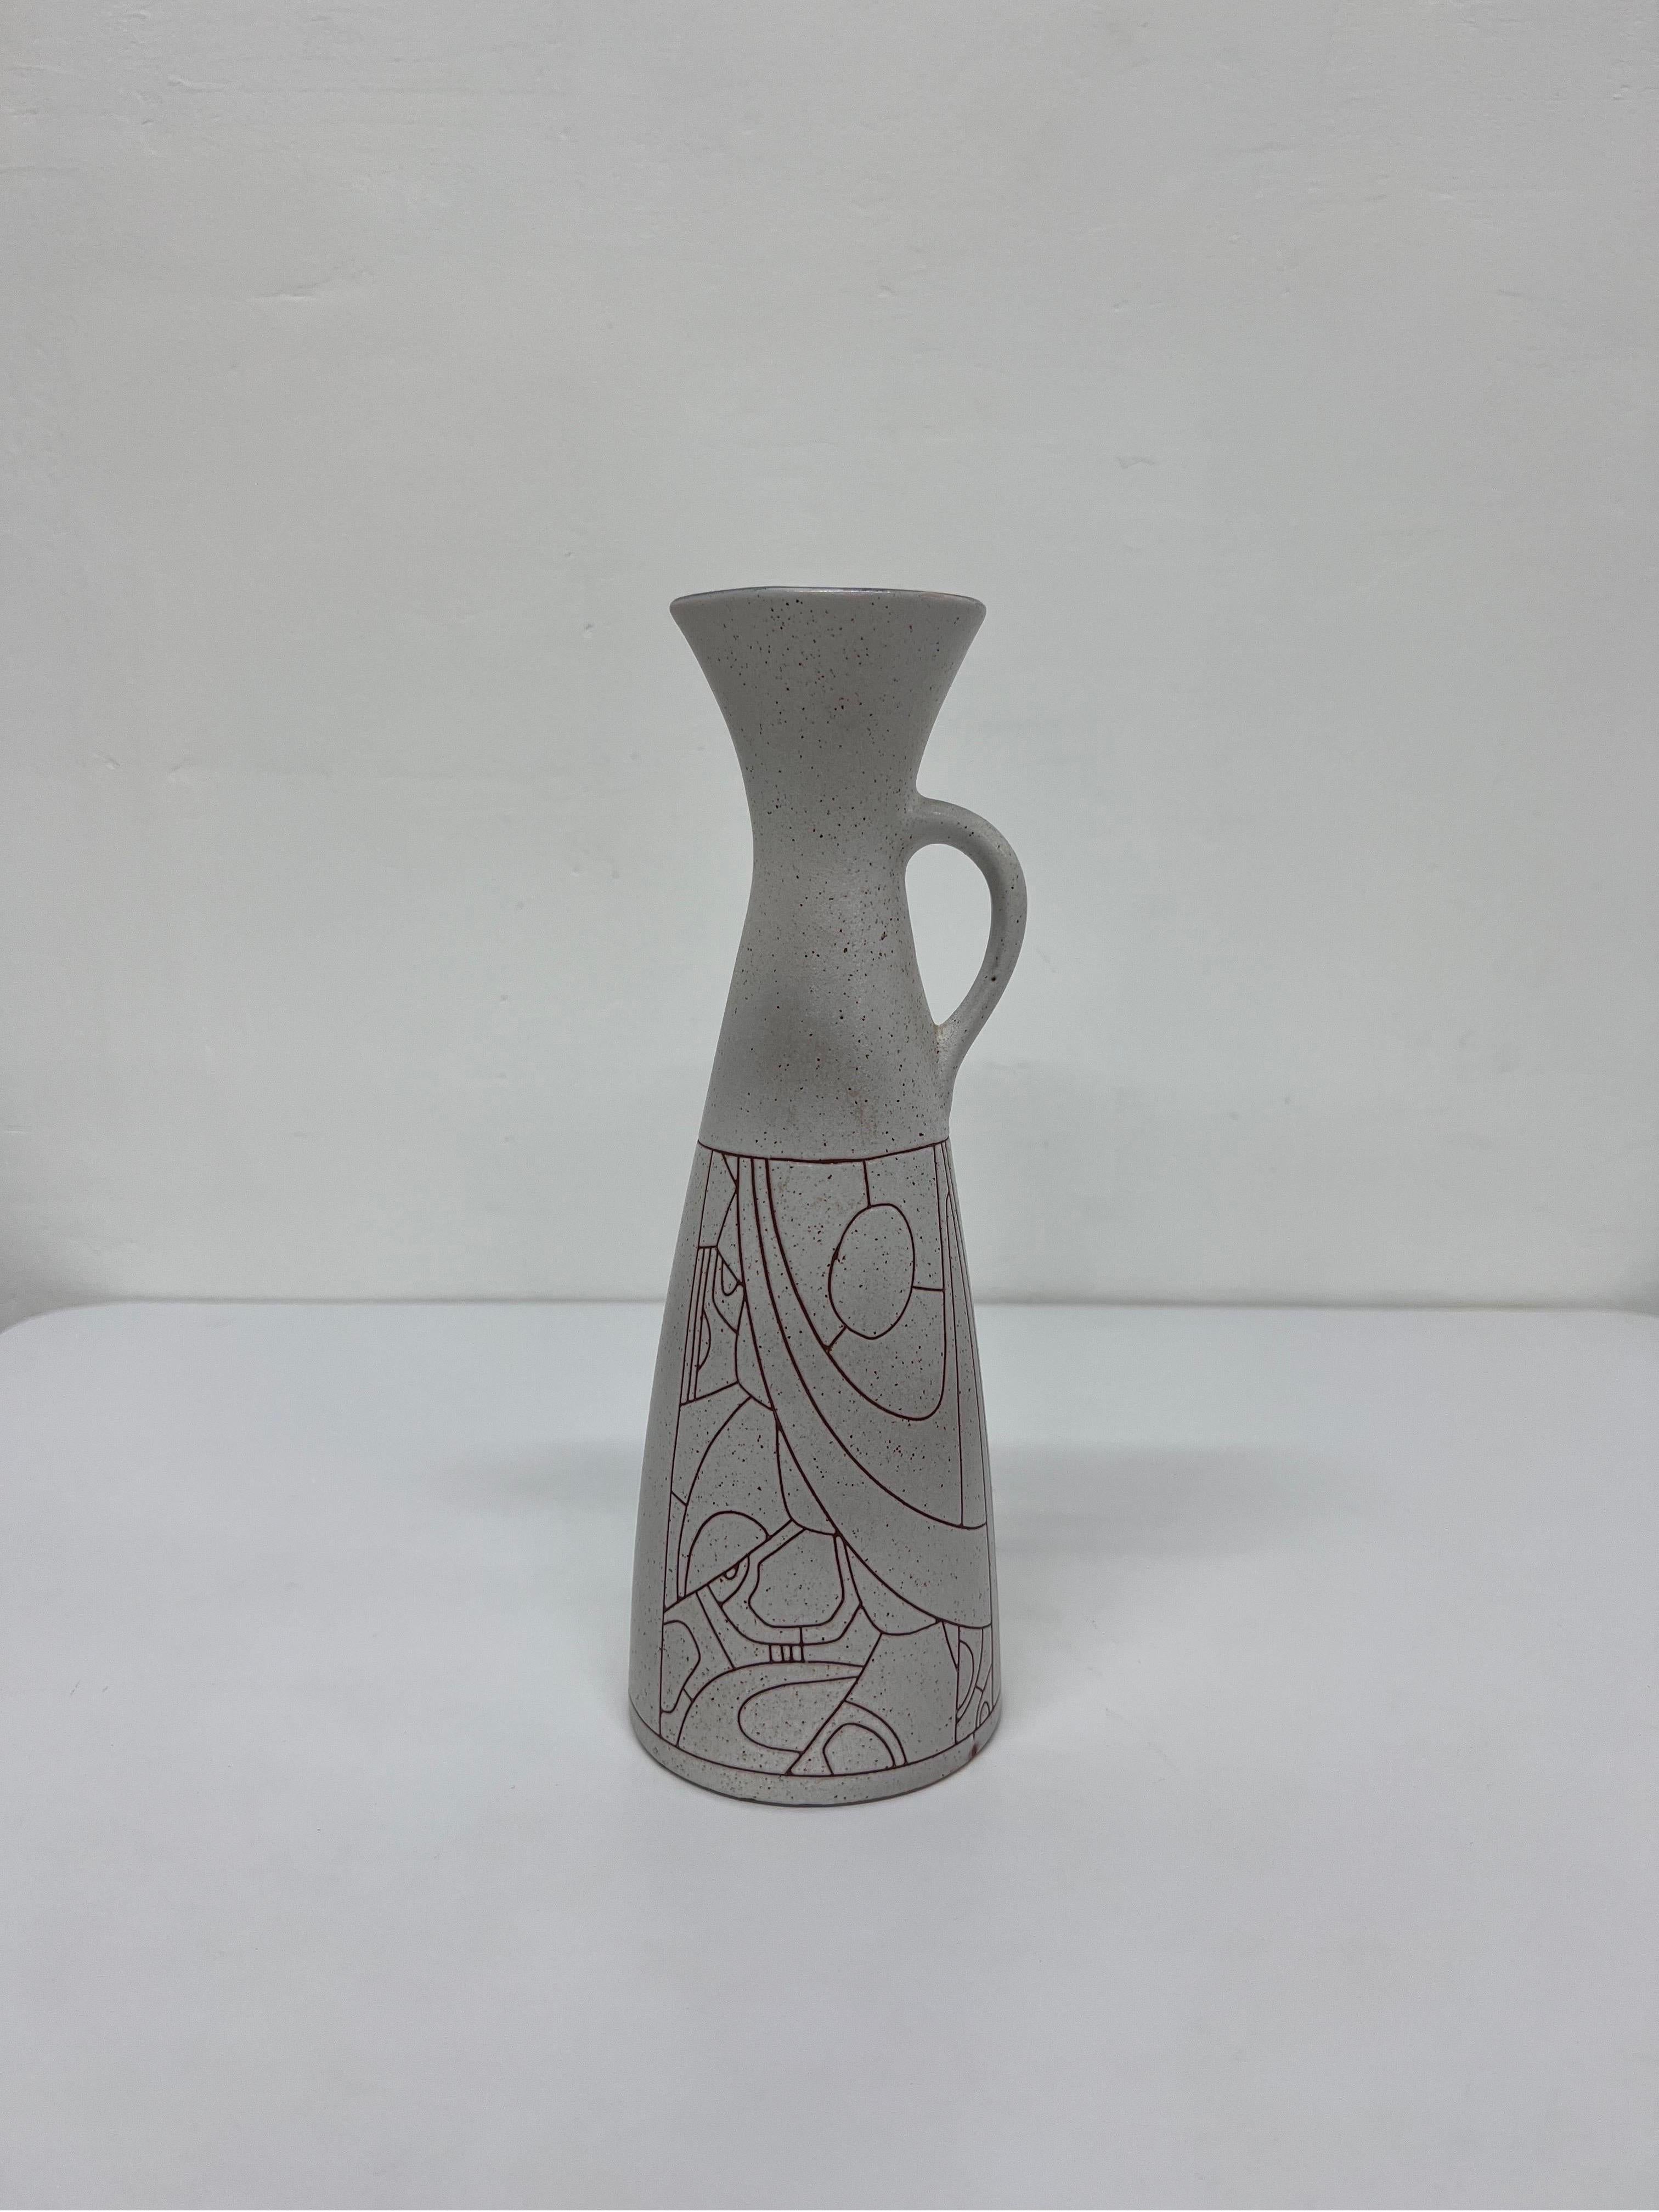 Mid-Century Modern pitcher or carafe with geometric pattern signed Lapid Israel.